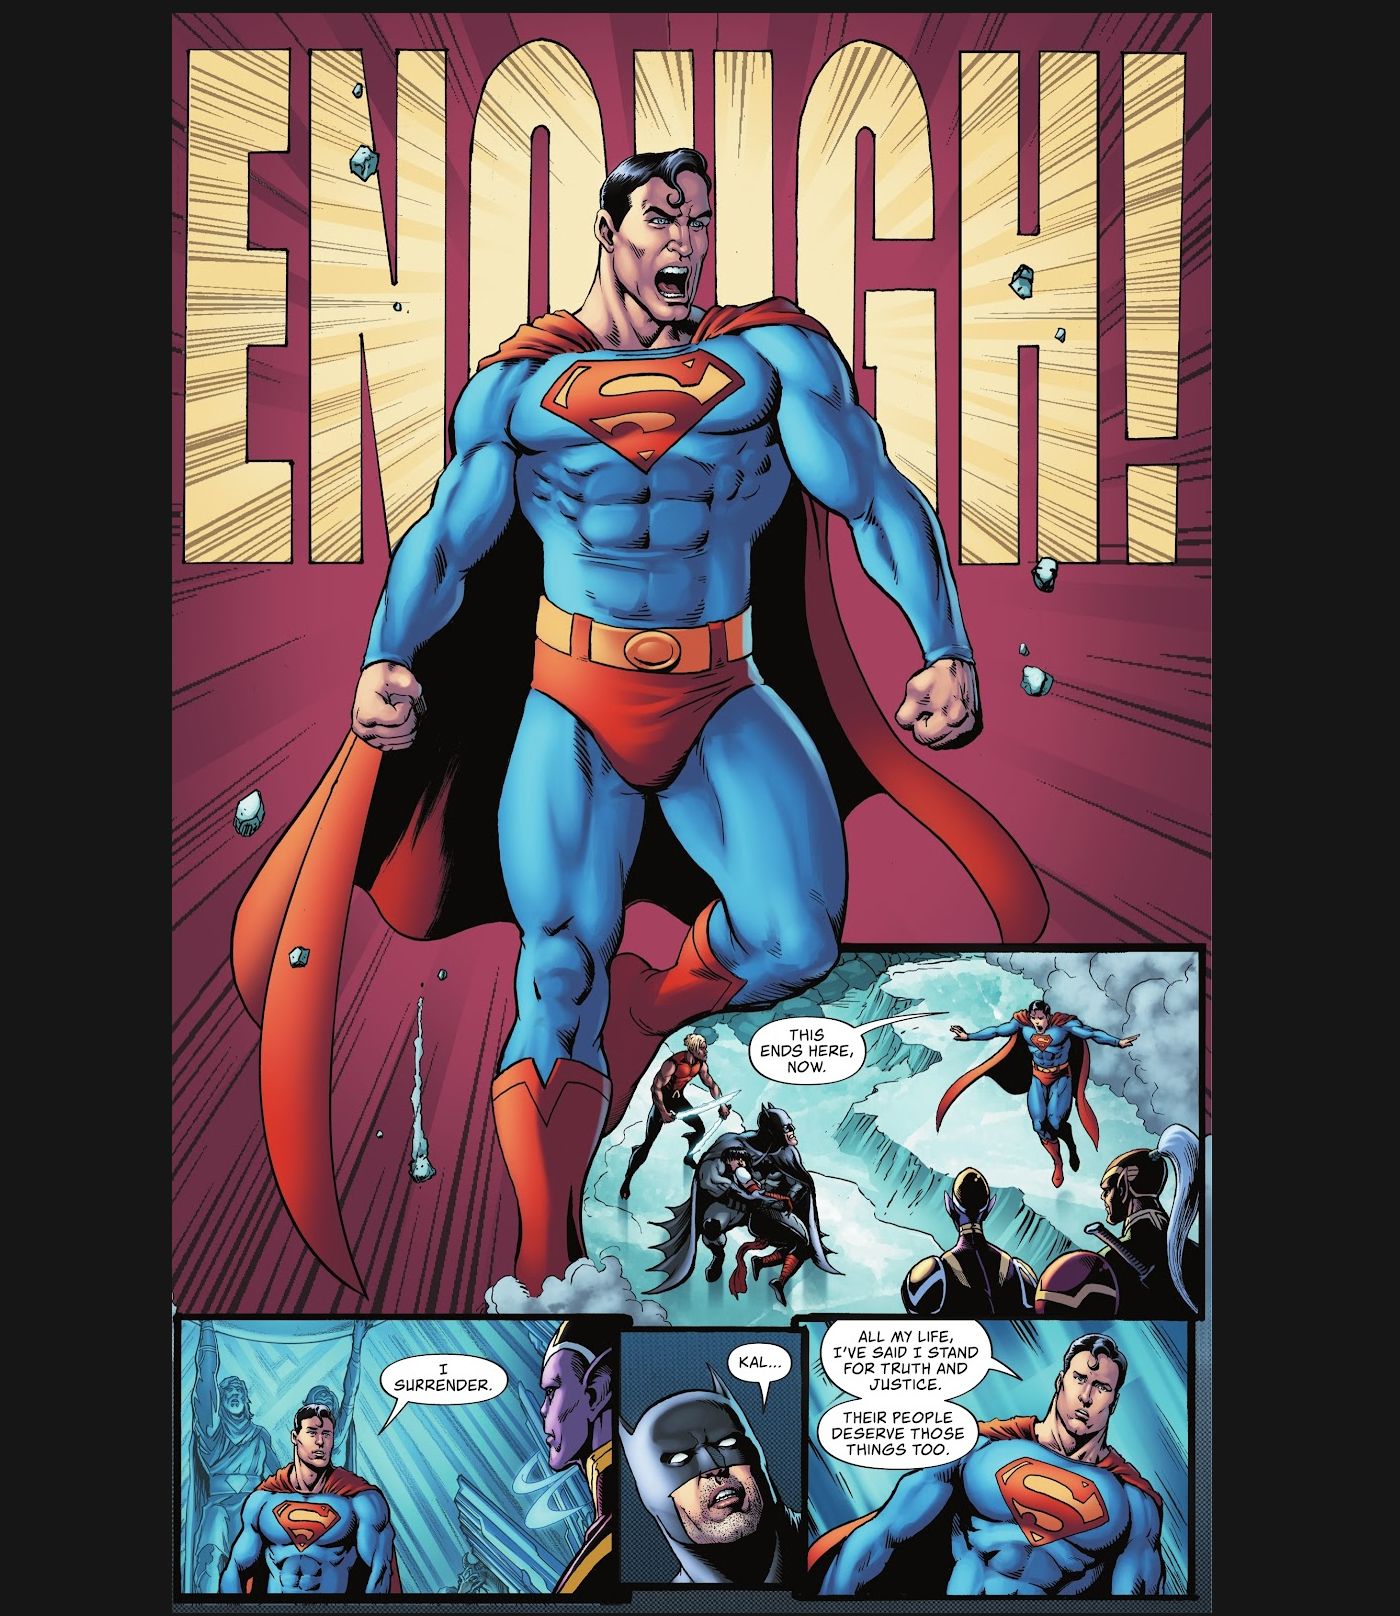 Superman shouts "ENOUGH!" to stop Batman and the invaders from fighting.